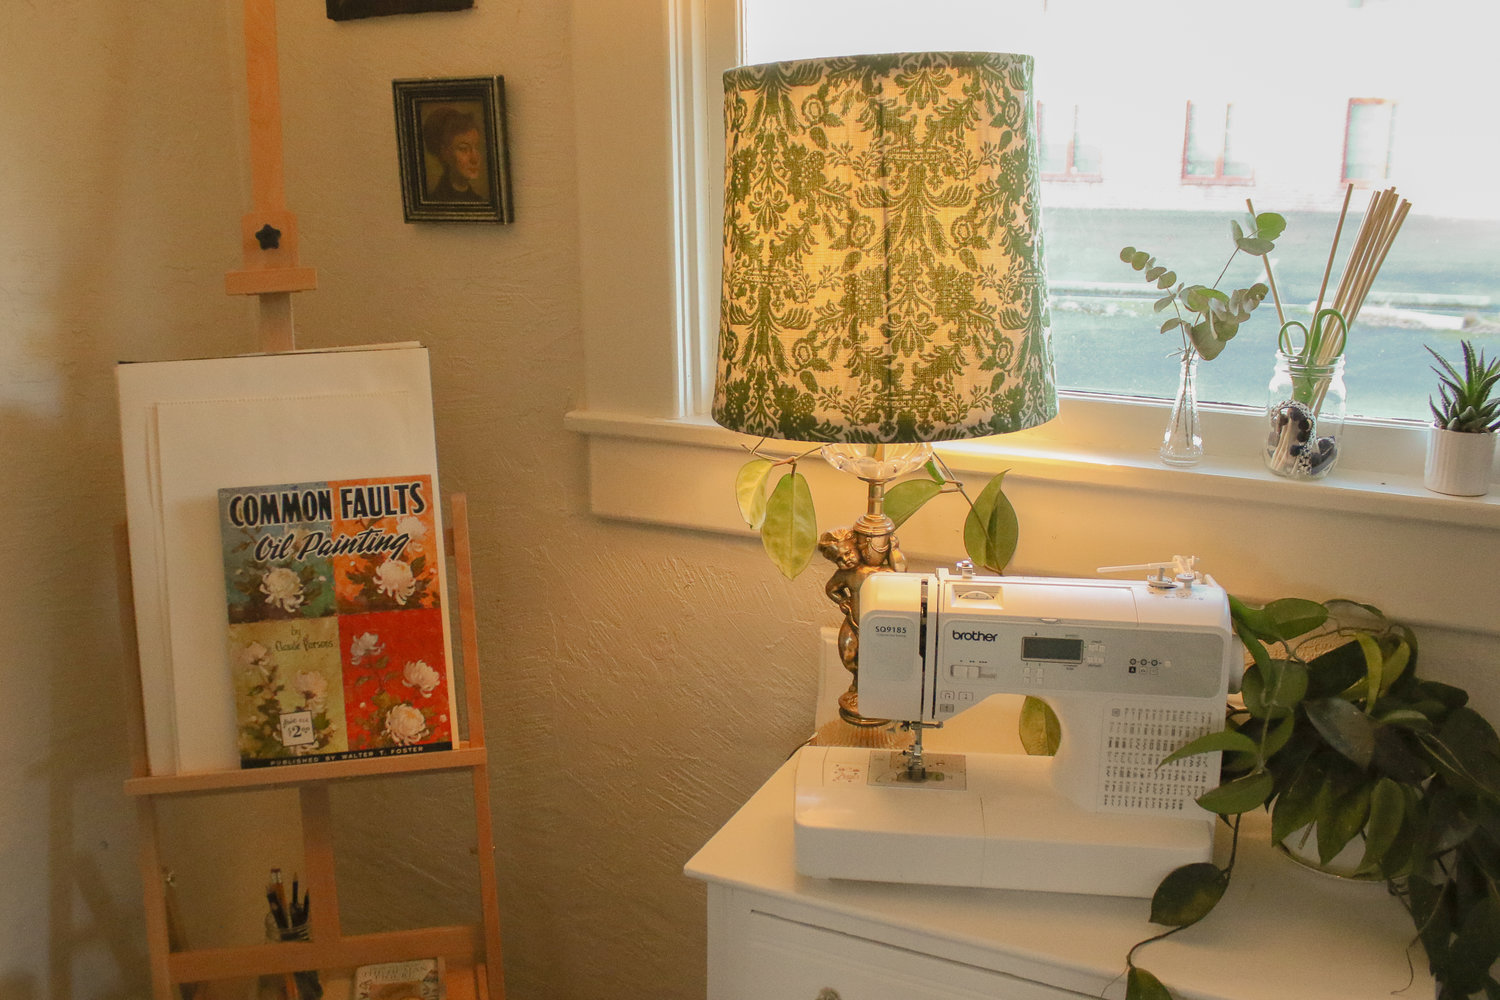 The Dandelion Creative Space, located at 120 NW Pacific Avenue, offers space and equipment for aspiring artists to use including a functional sowing machine.